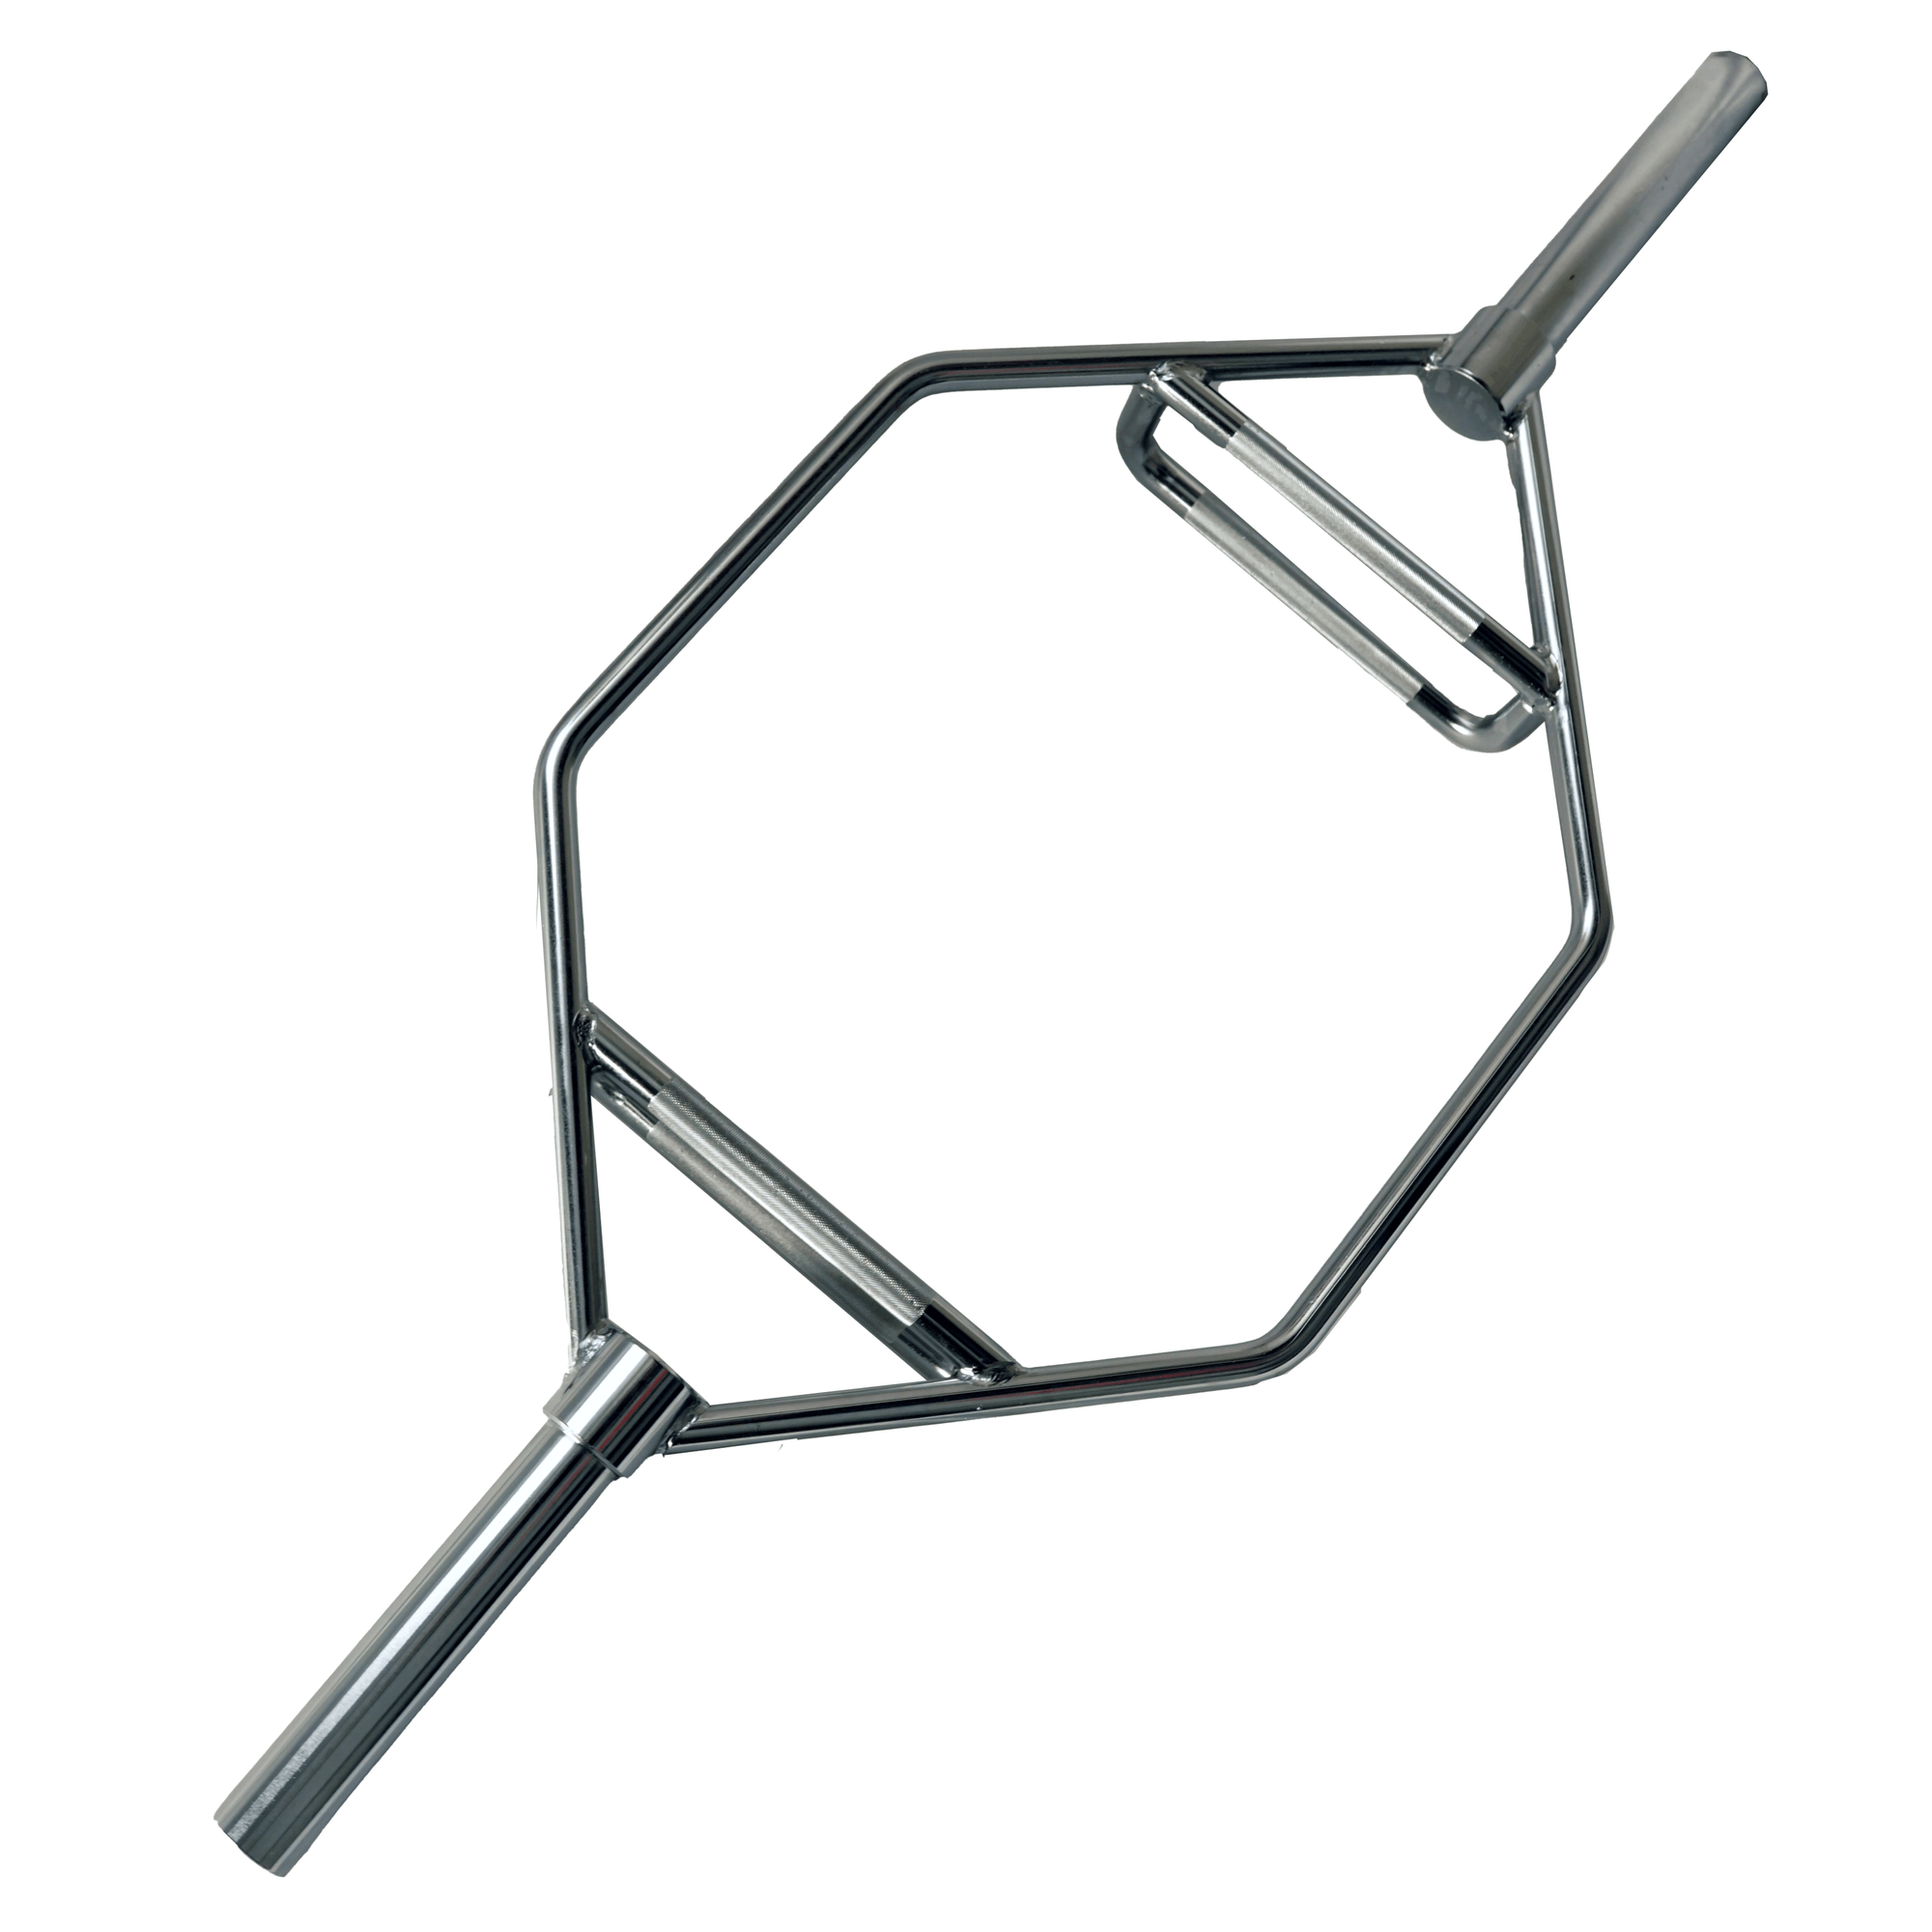 Fit It Out Shipment40 Trap (Hex) Bar - 66 inch (long sleeve)